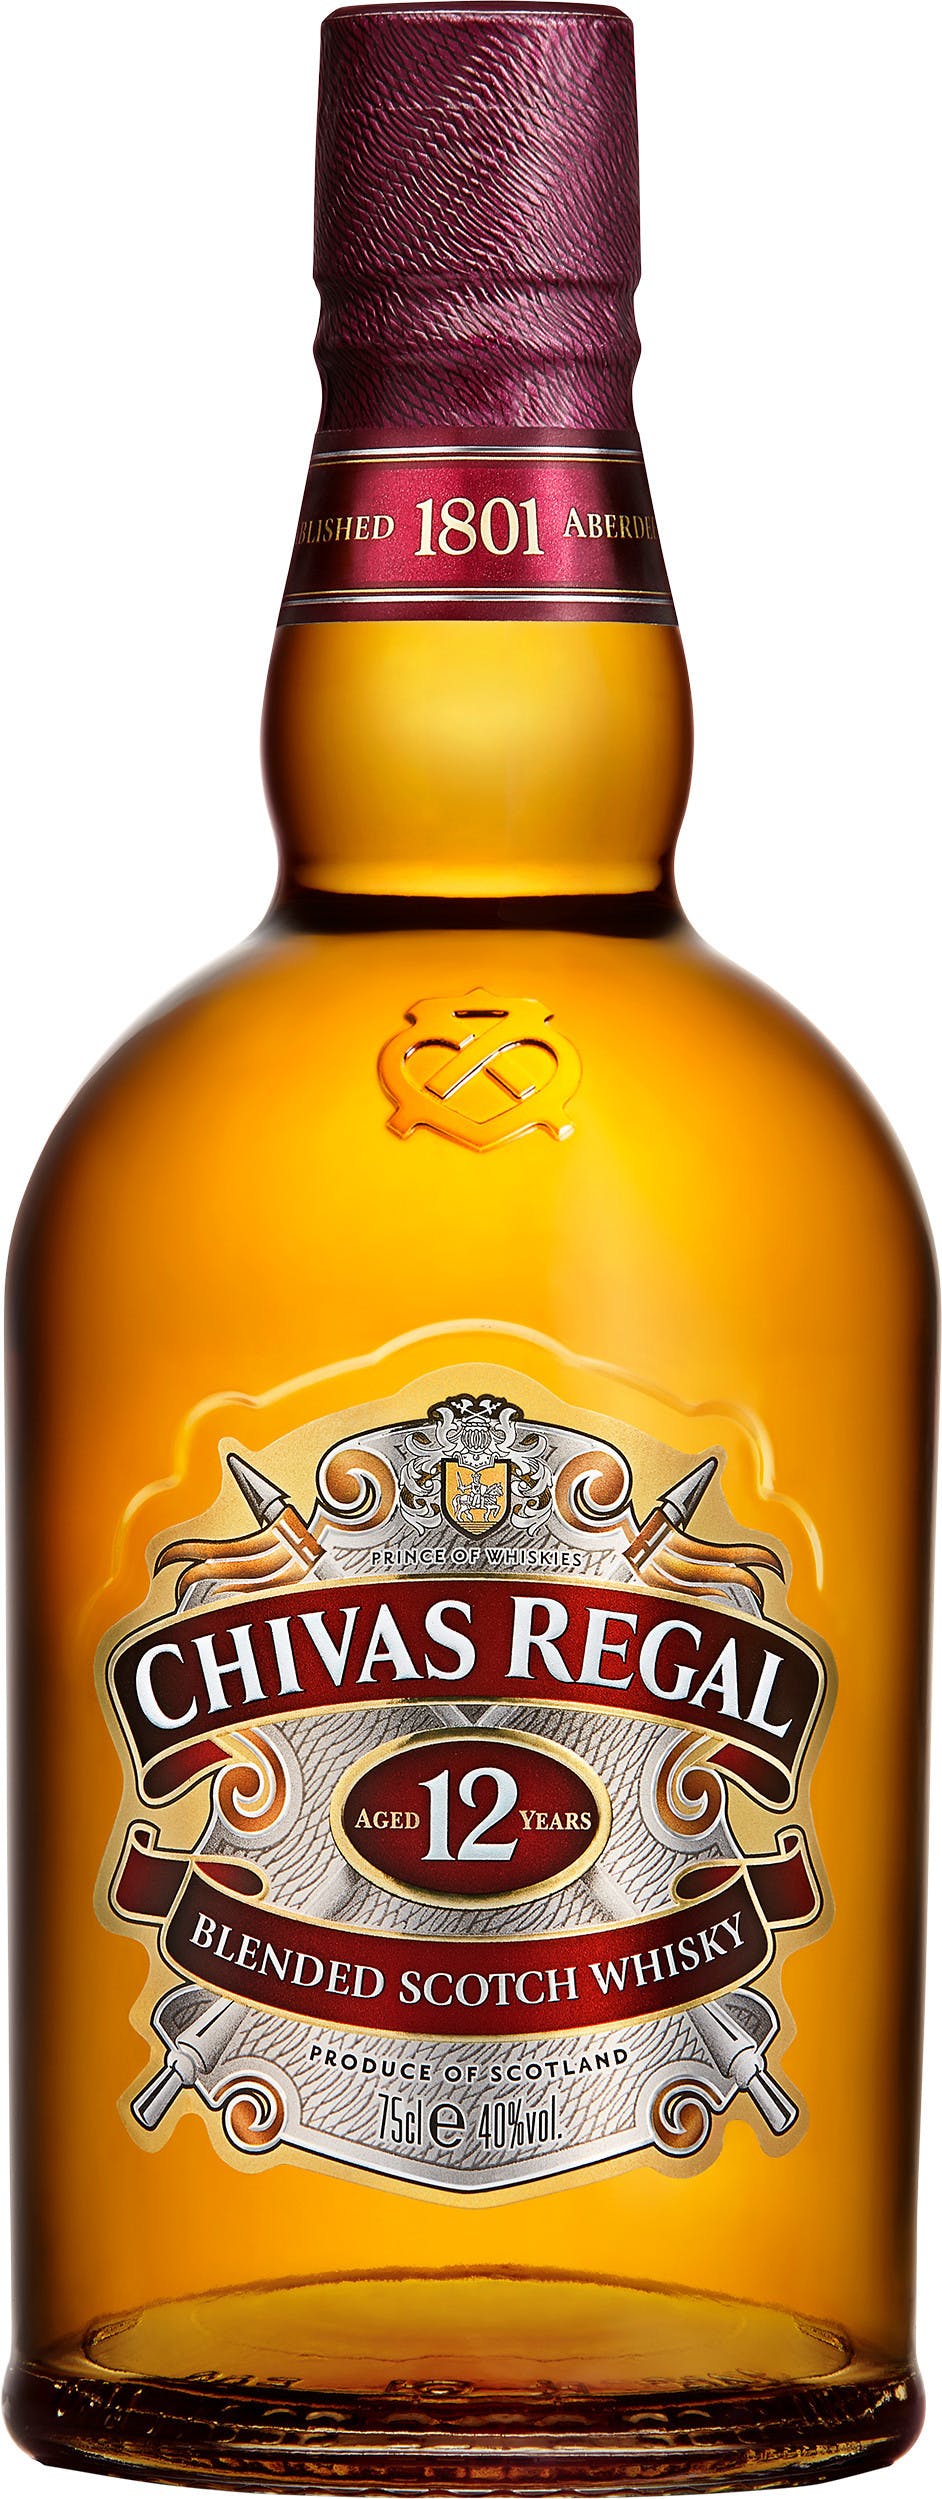 State Blended old Scotch 750ml Regal Discount year 12 Chivas Liquors Garden Whisky -